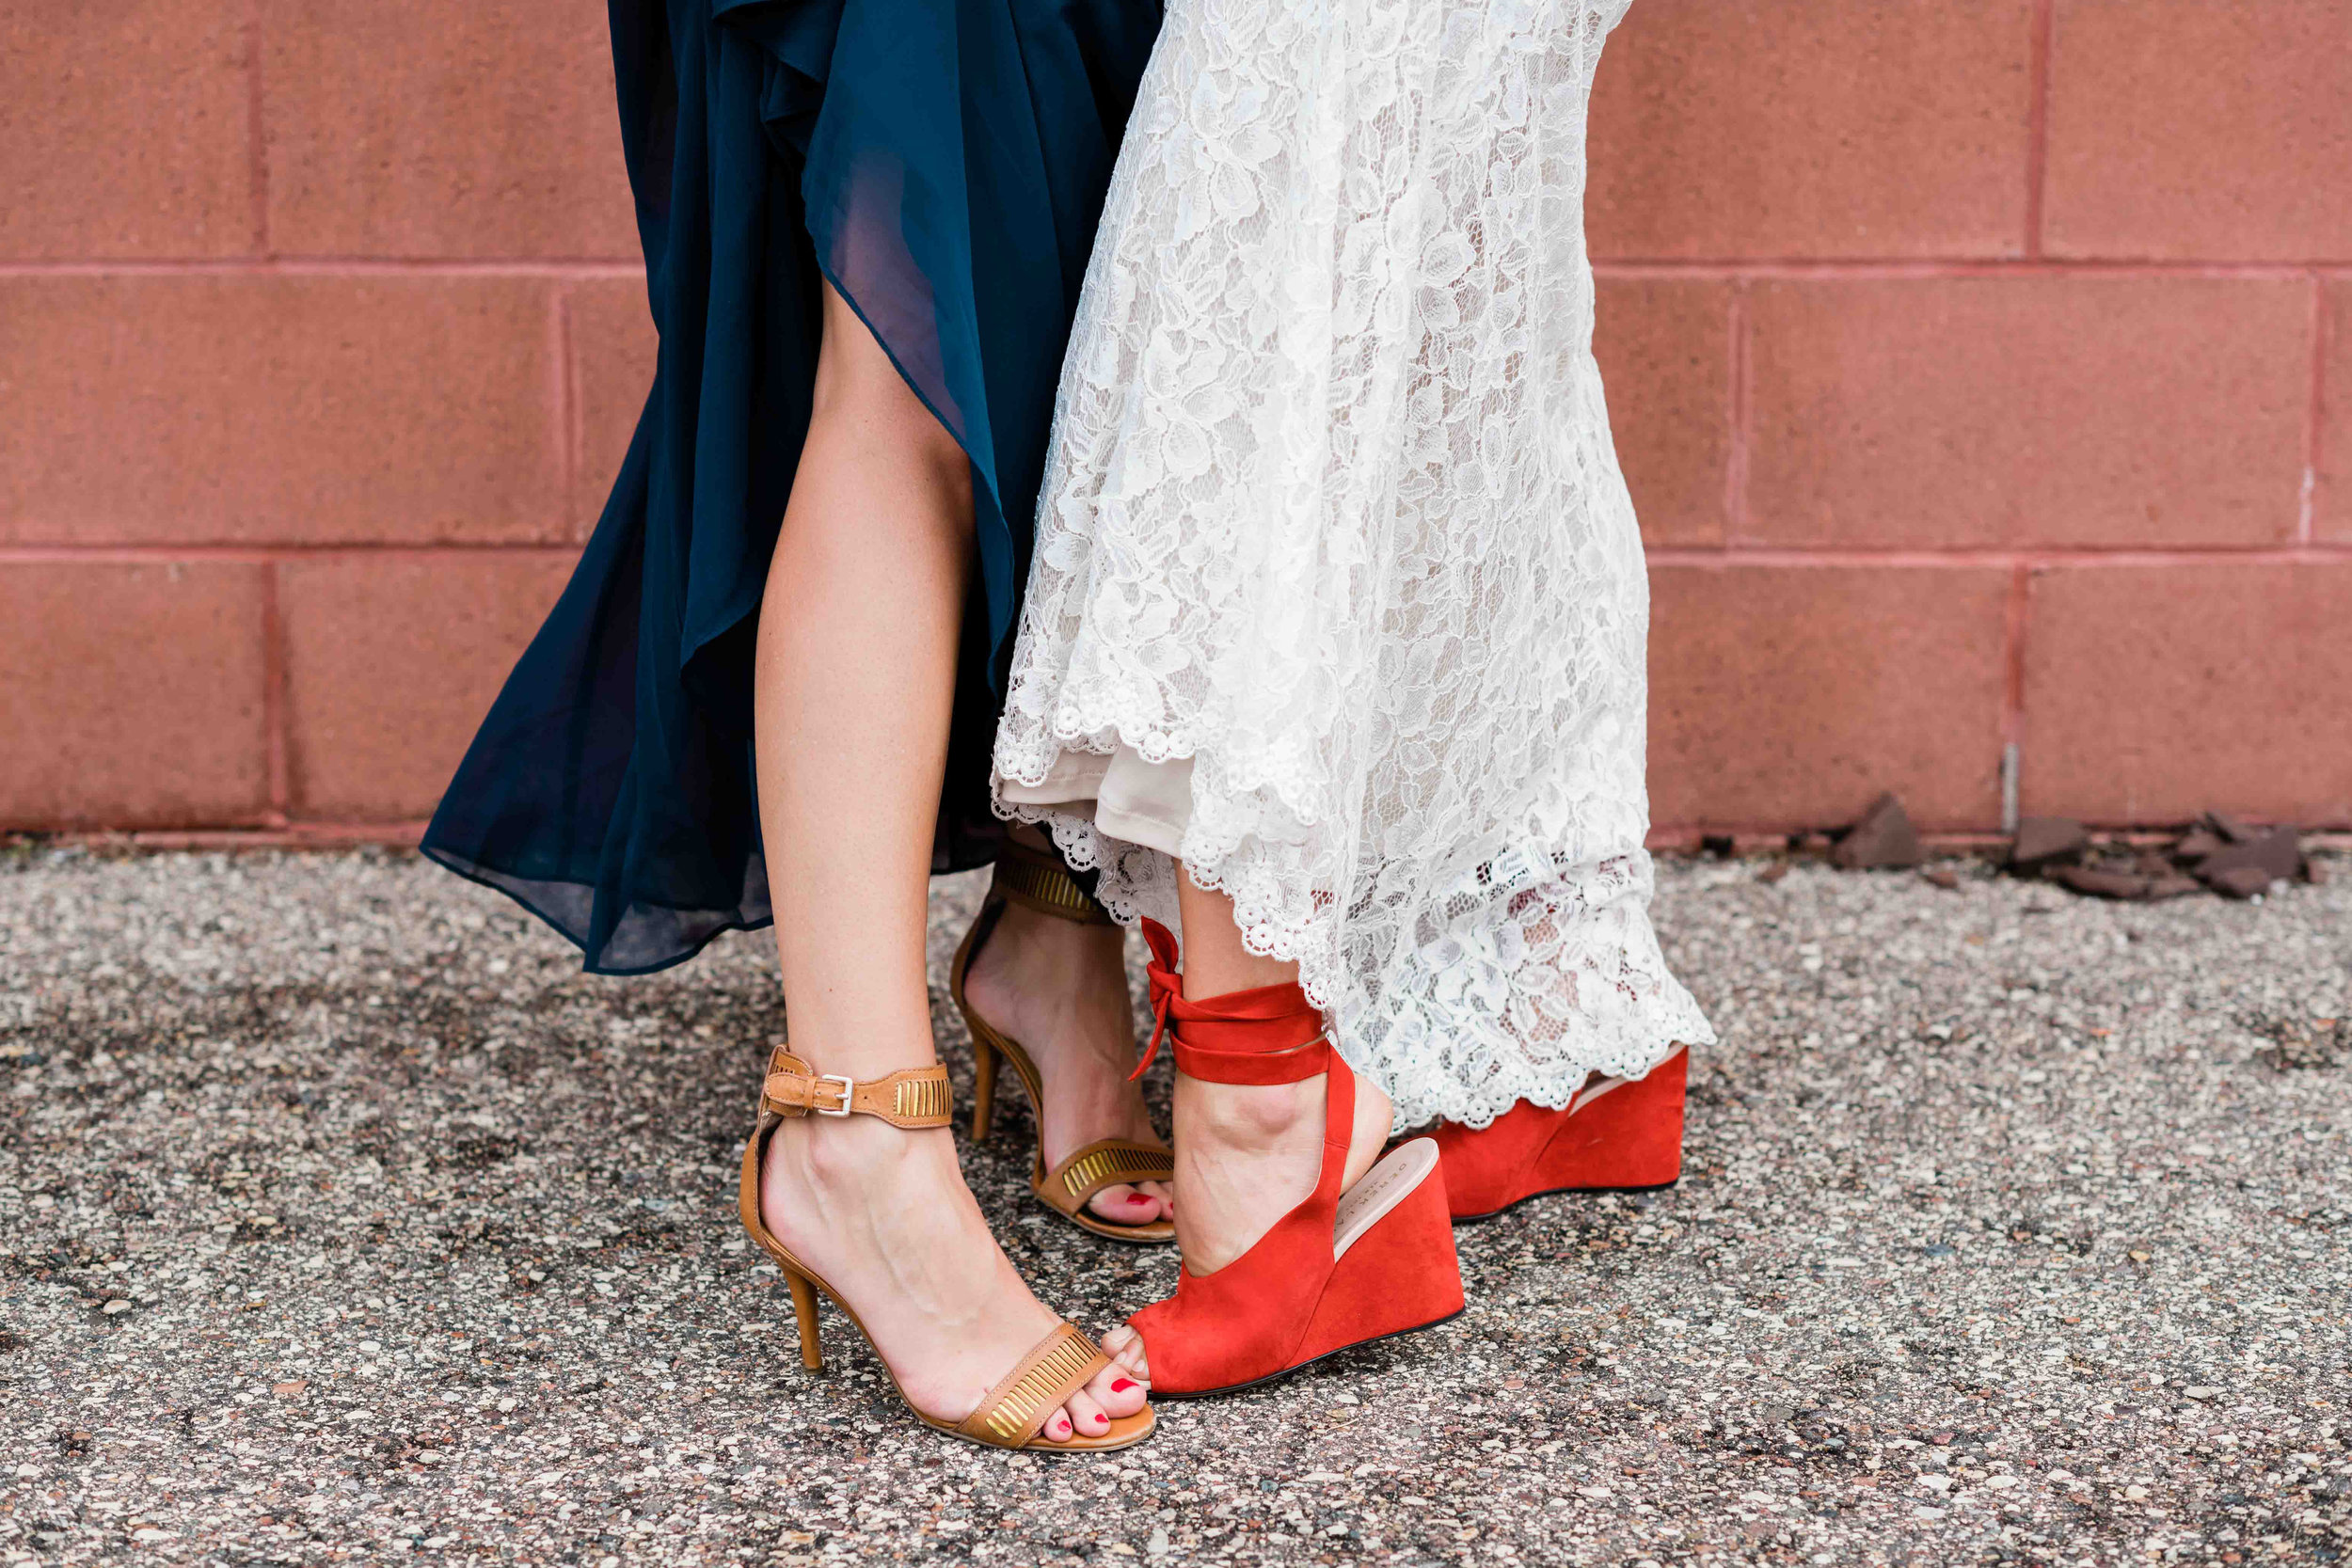 Bride and bridesmaid show off their shoes